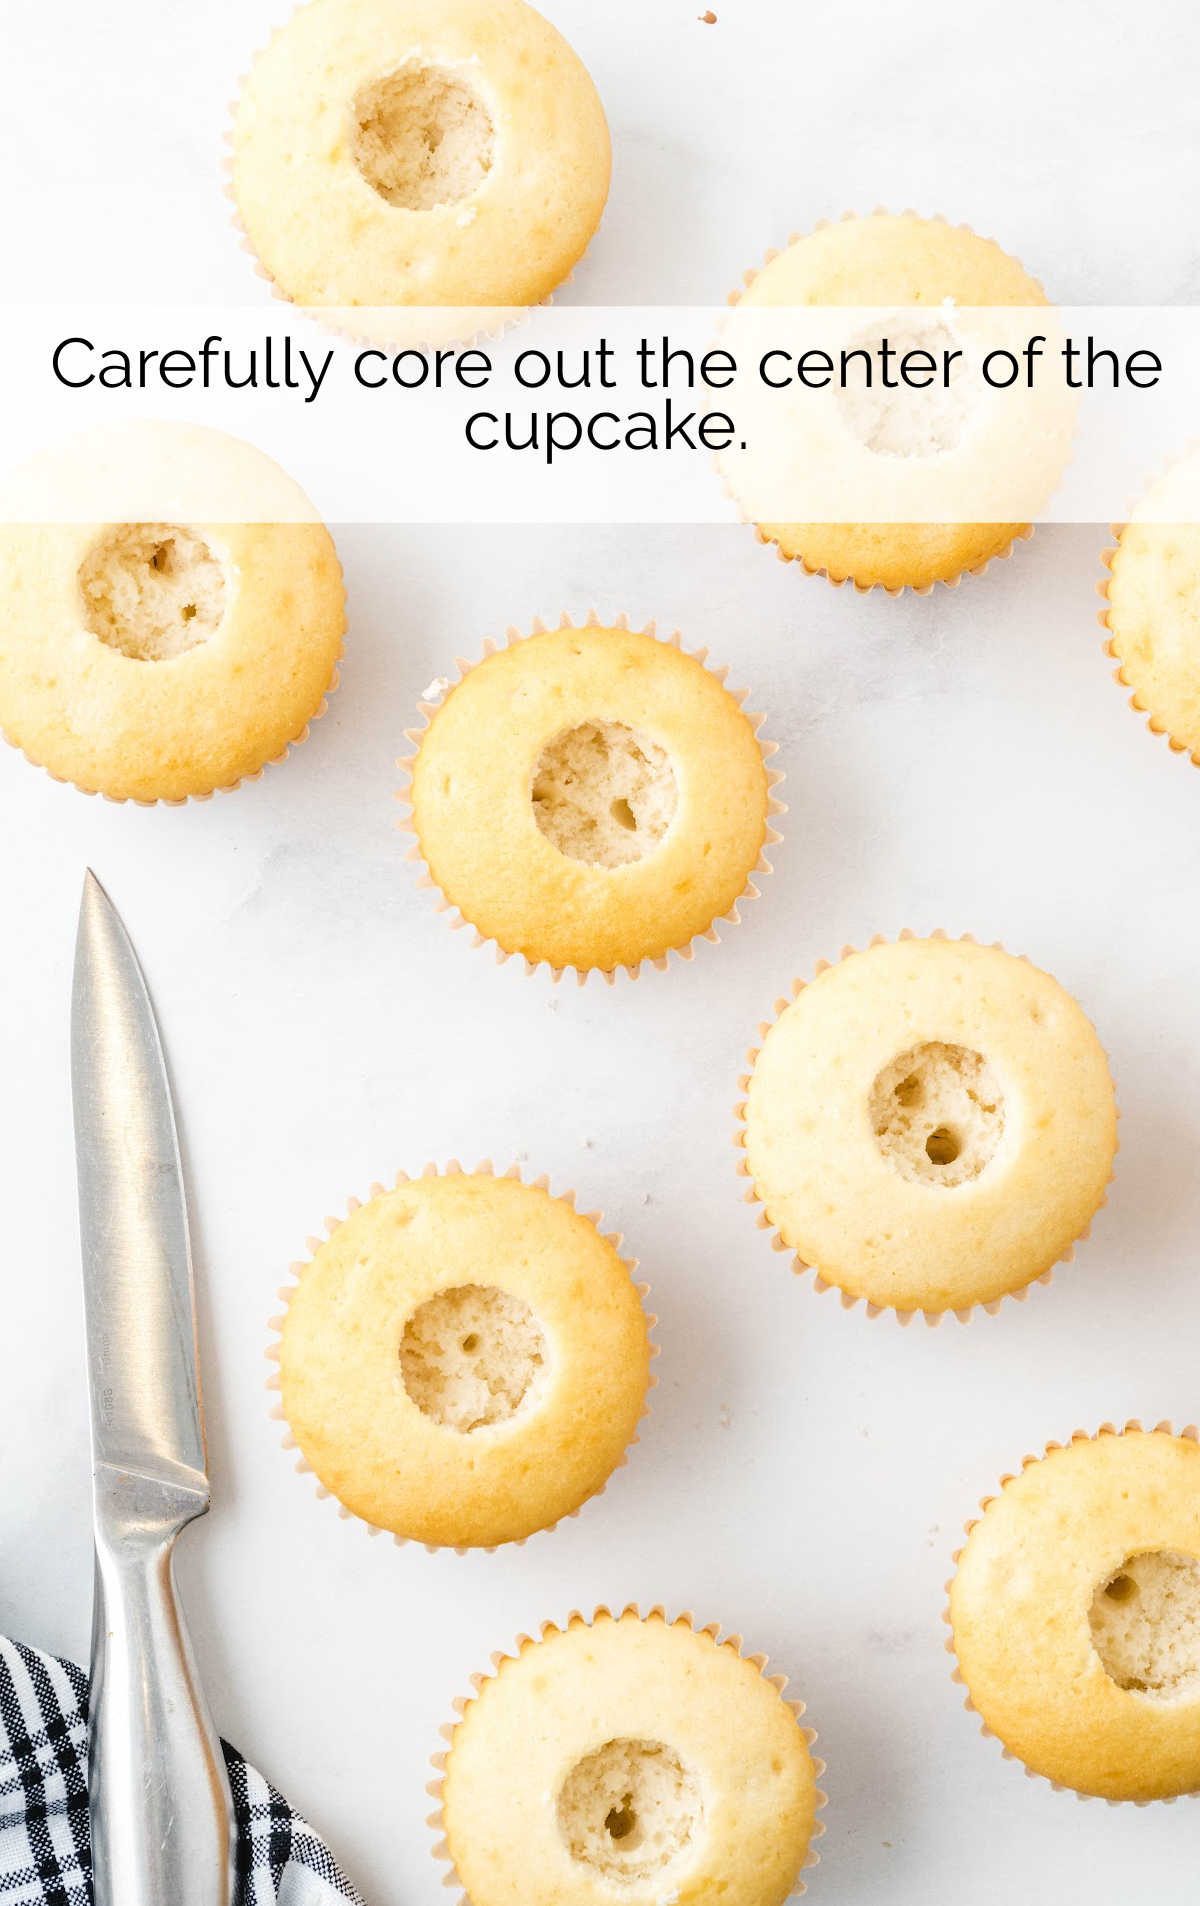 core cut out the center of the cupcakes